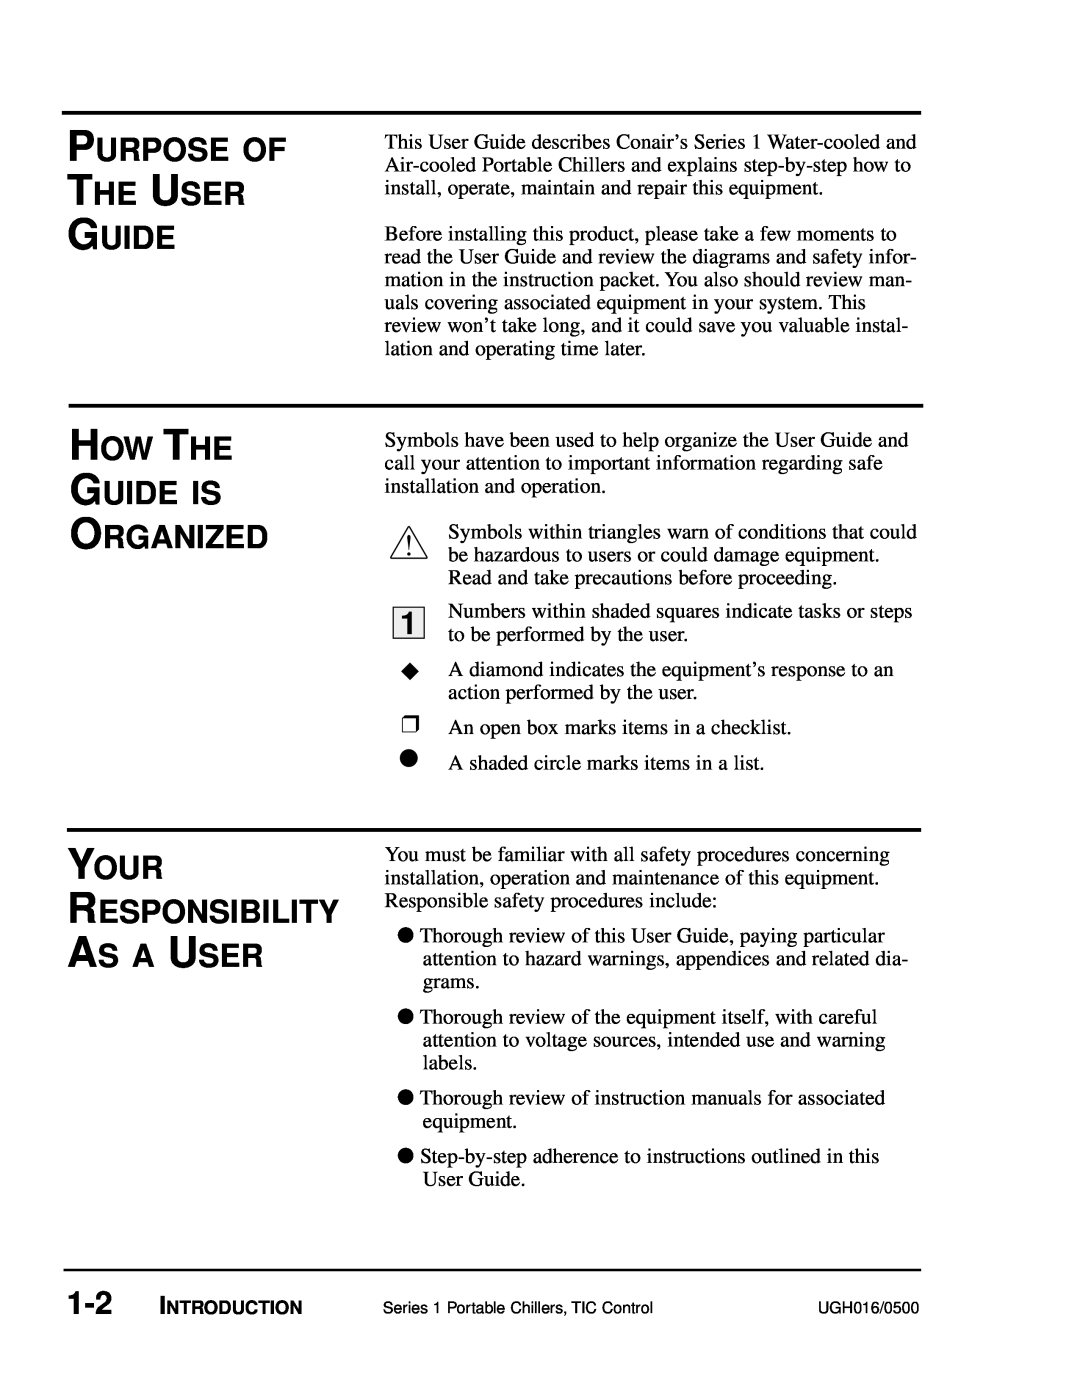 Conair UGH016/0500 manual Purpose Of The User Guide, How The Guide Is Organized, Your Responsibility As A User 